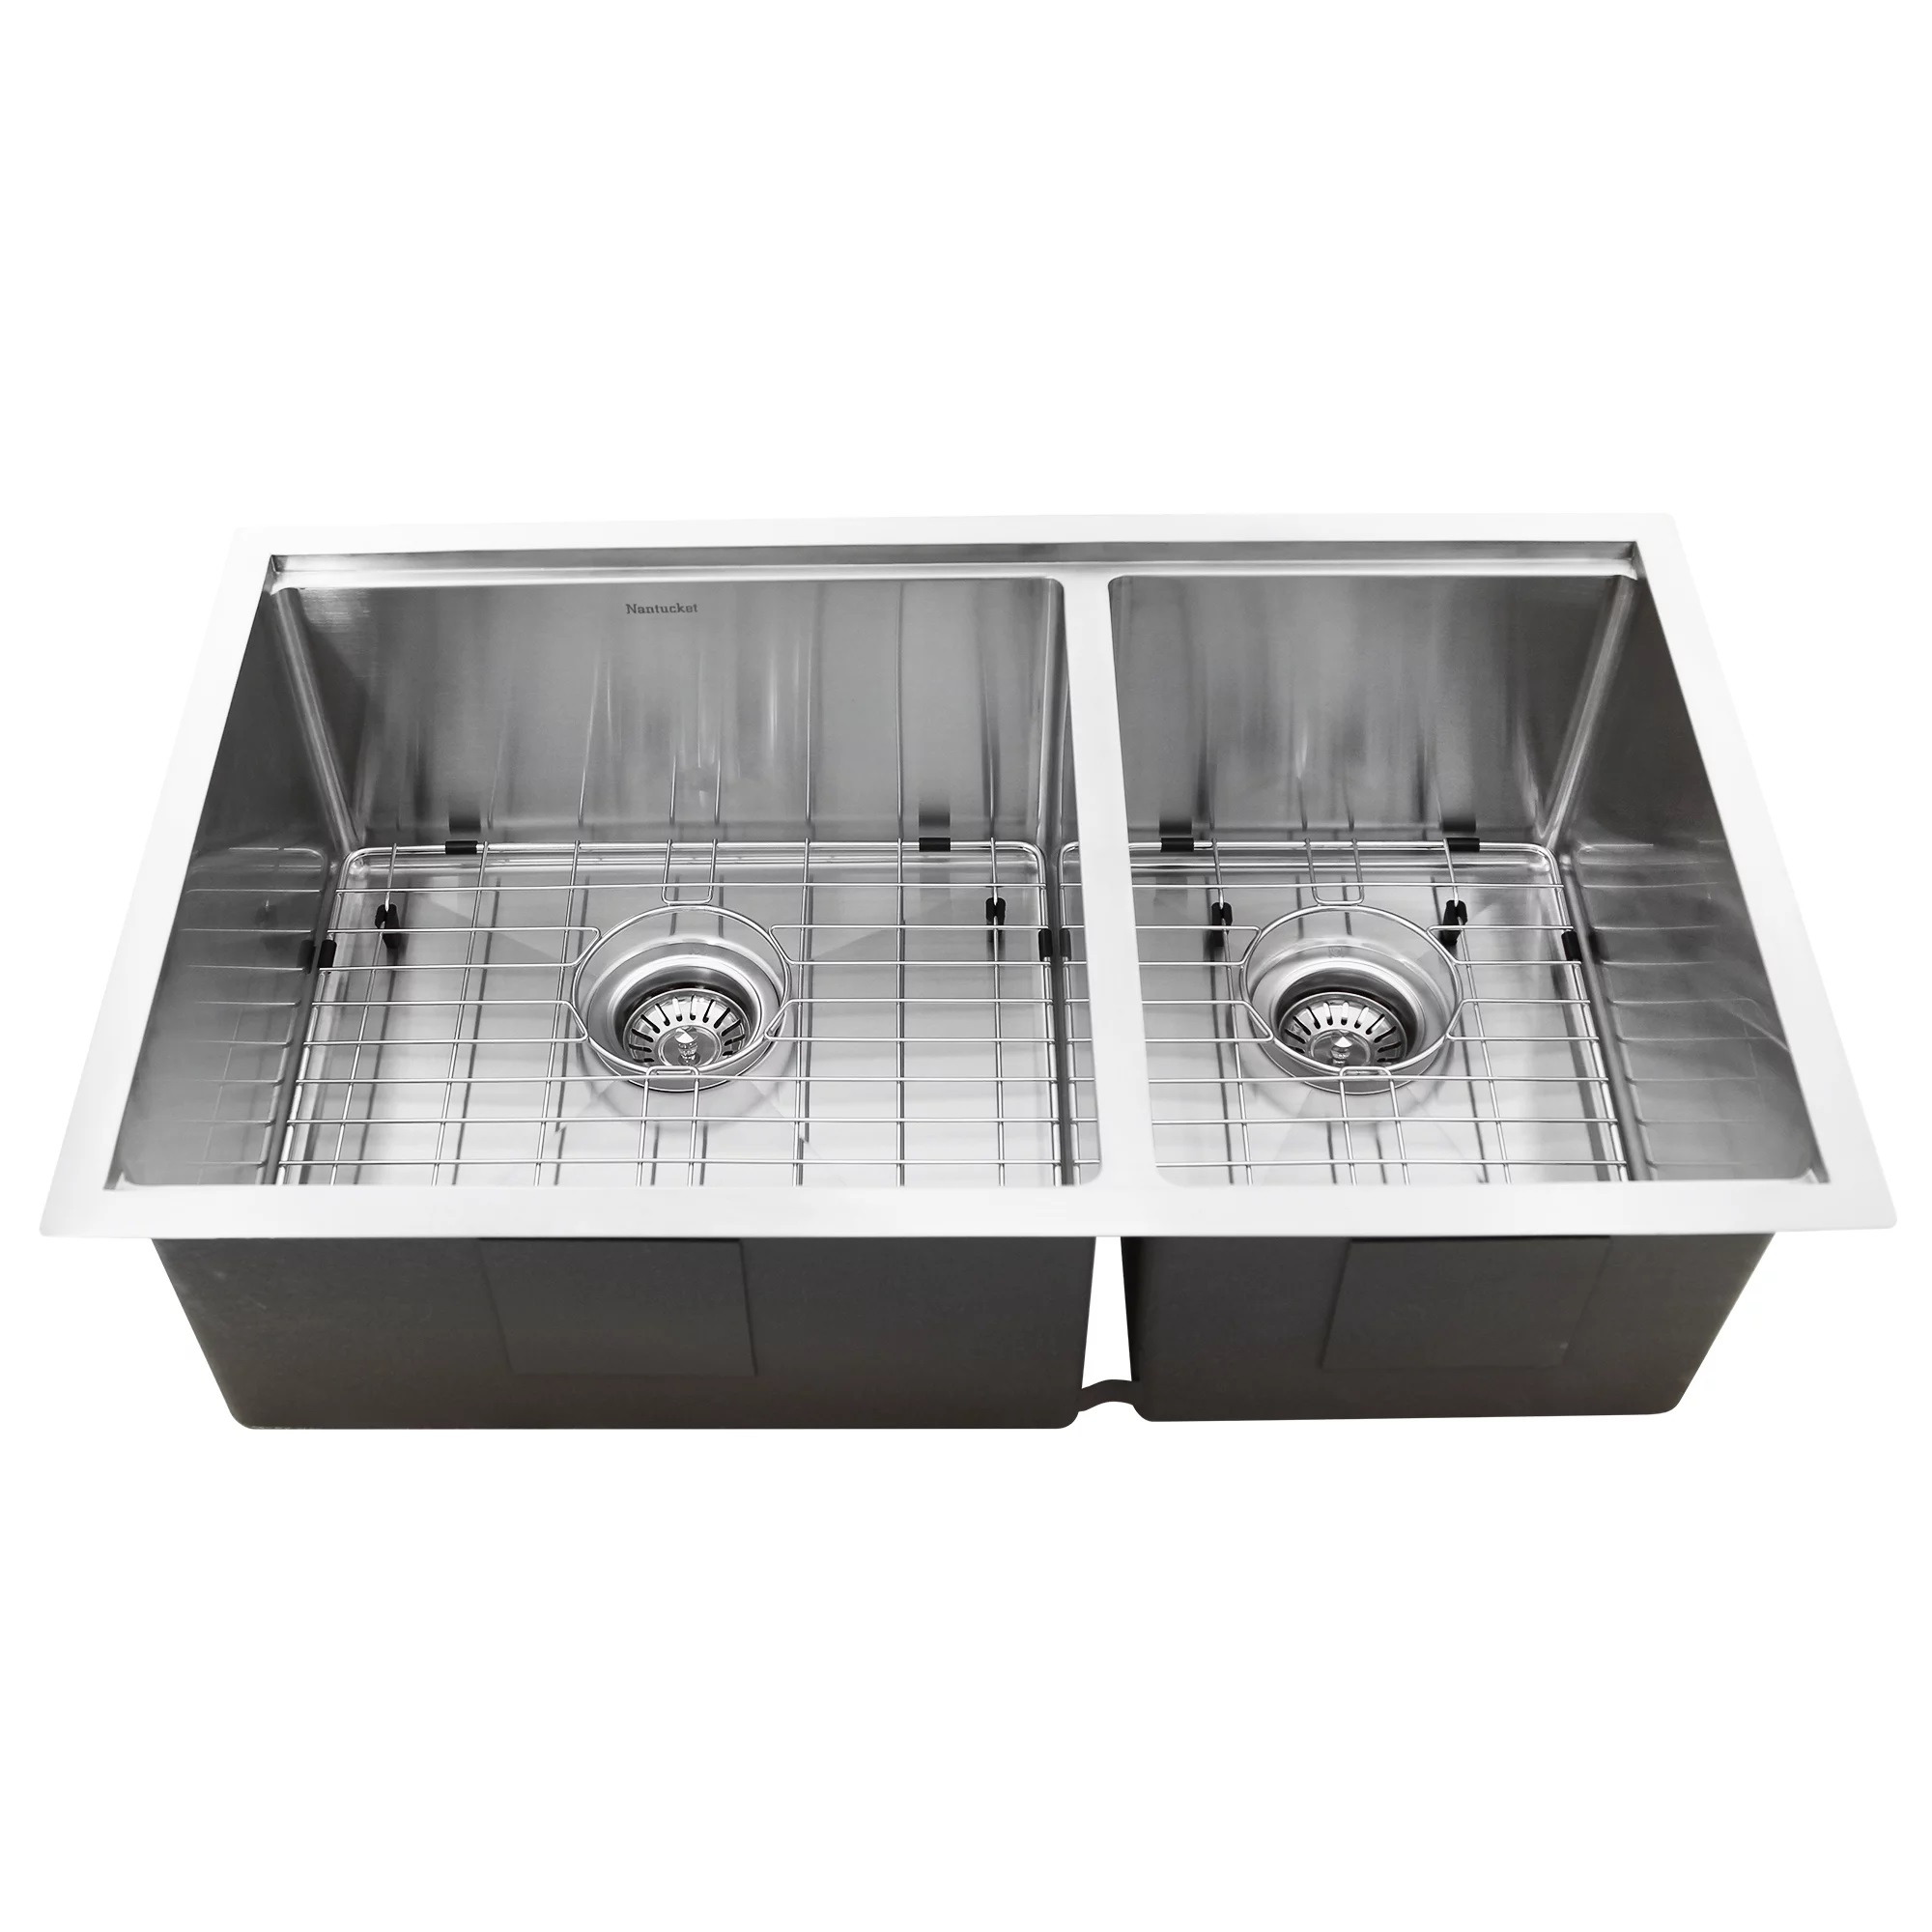 Nantucket Sinks SR-PS-3219-OS-16 SR-PS-3219-OS-16 Offset Double Bowl Prep Station Small Radius Undermount Stainless Sink with Accessories - Click Image to Close